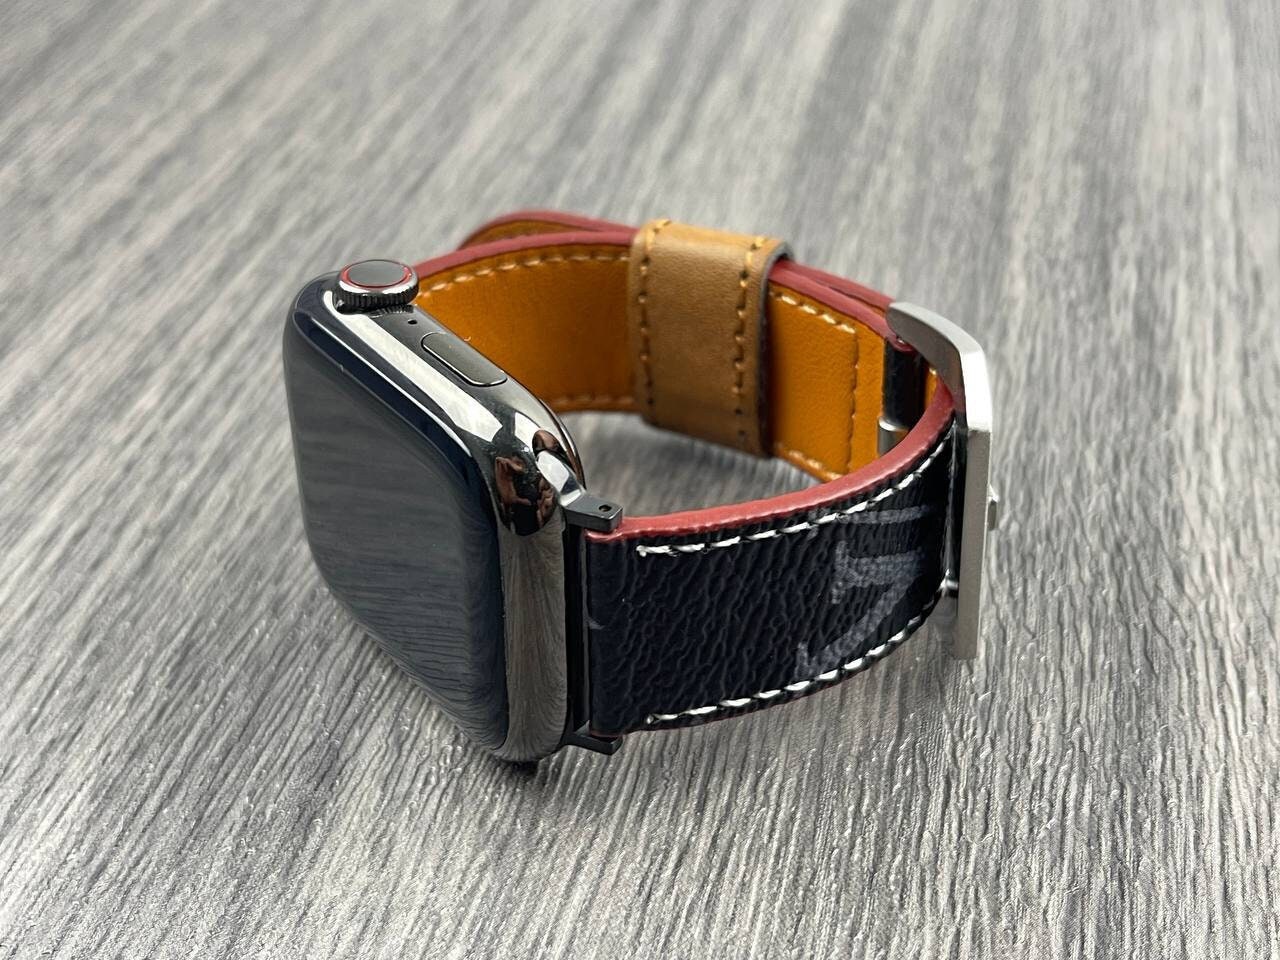 lv watch band 44mm